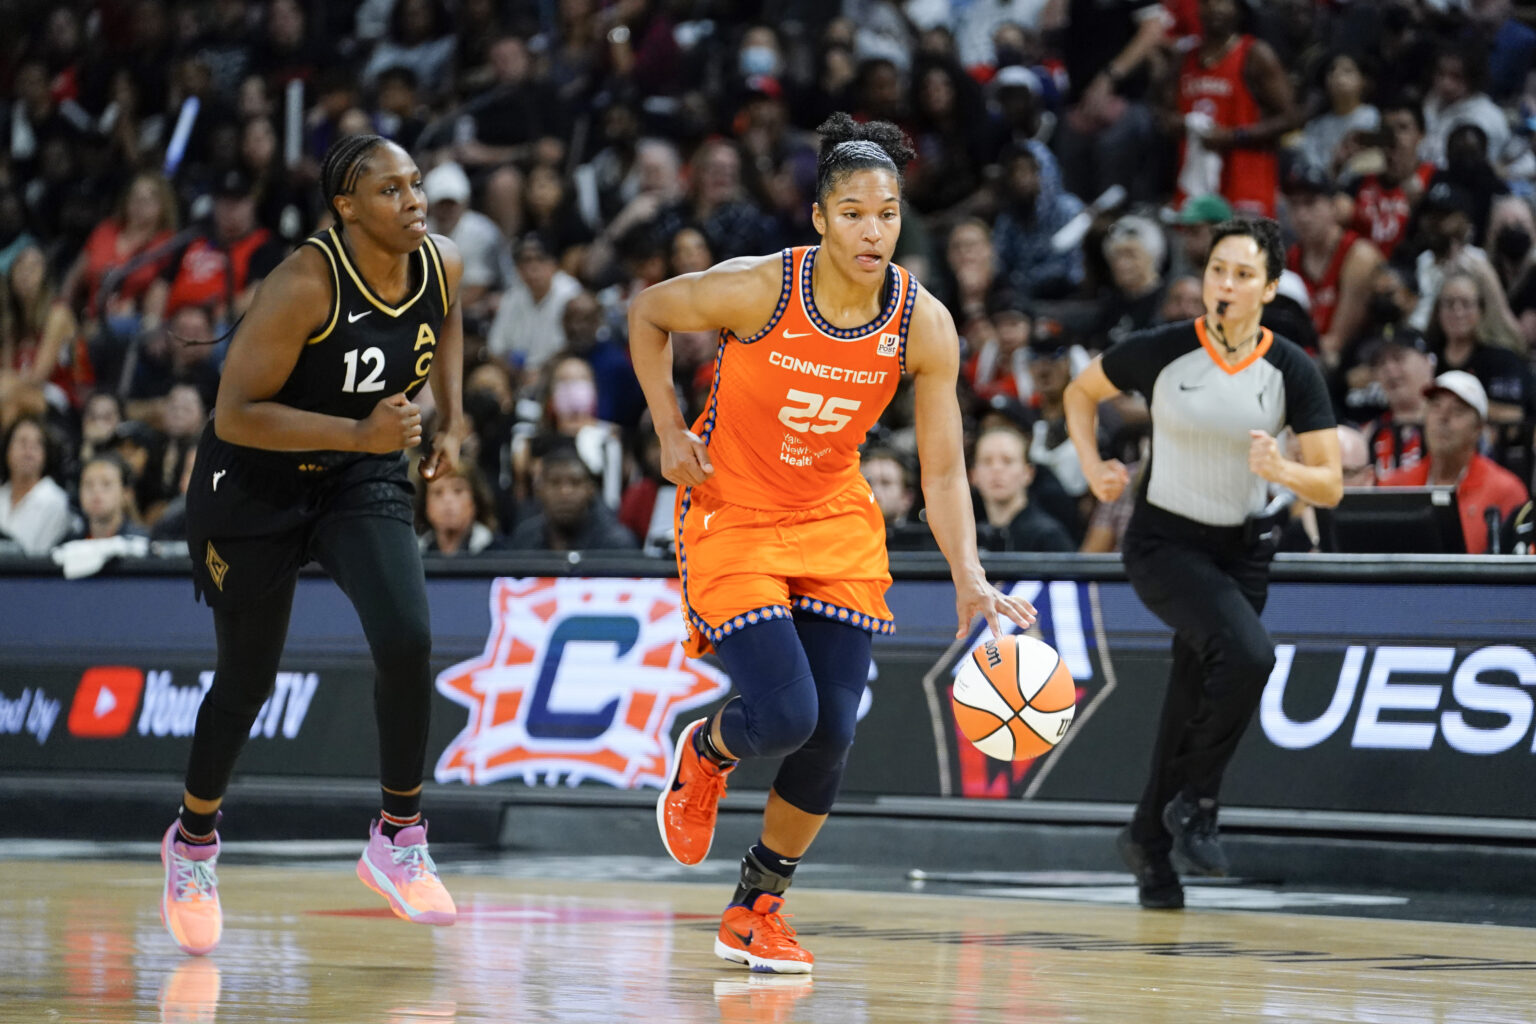 Aces Beat Sun 6764 in Game 1 of the WNBA Finals Beyond Women's Sports